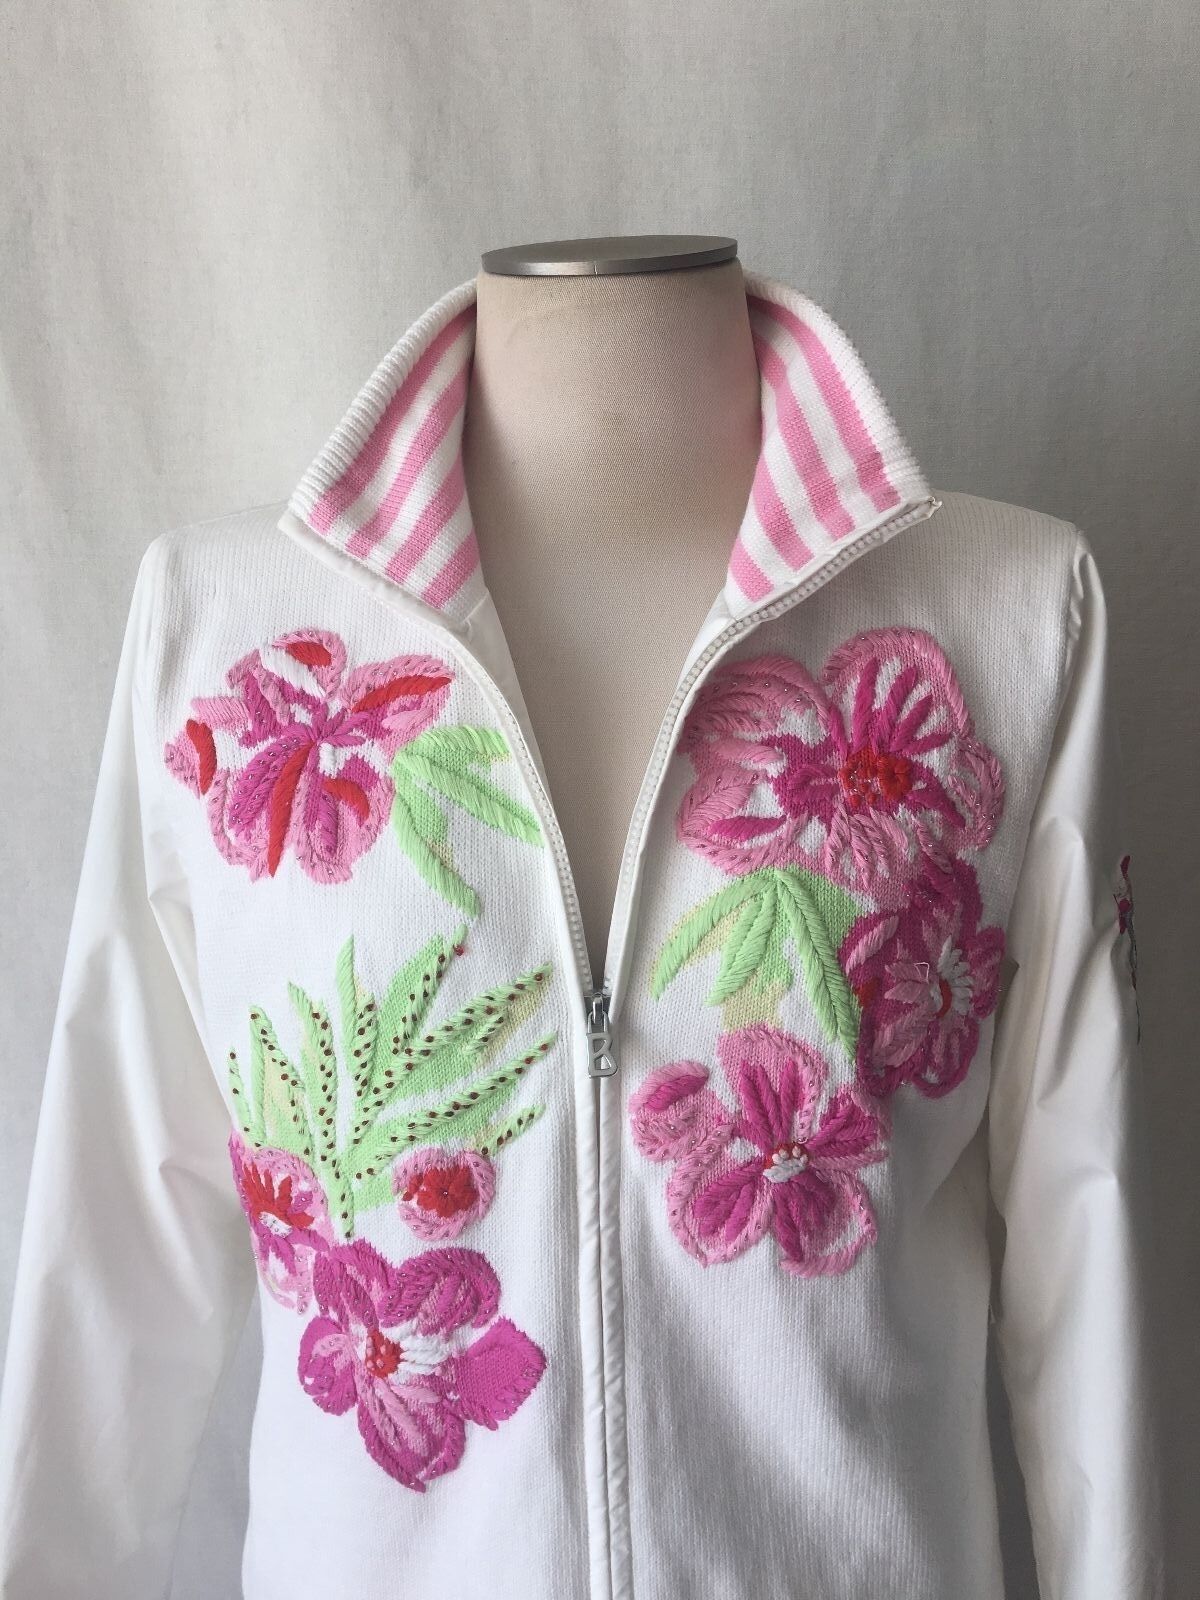 BOGNER BEAUTIFUL WHITE with EMBROIDERY and SIDE POCKETS WINDBRACKER. L. 42 Bogner